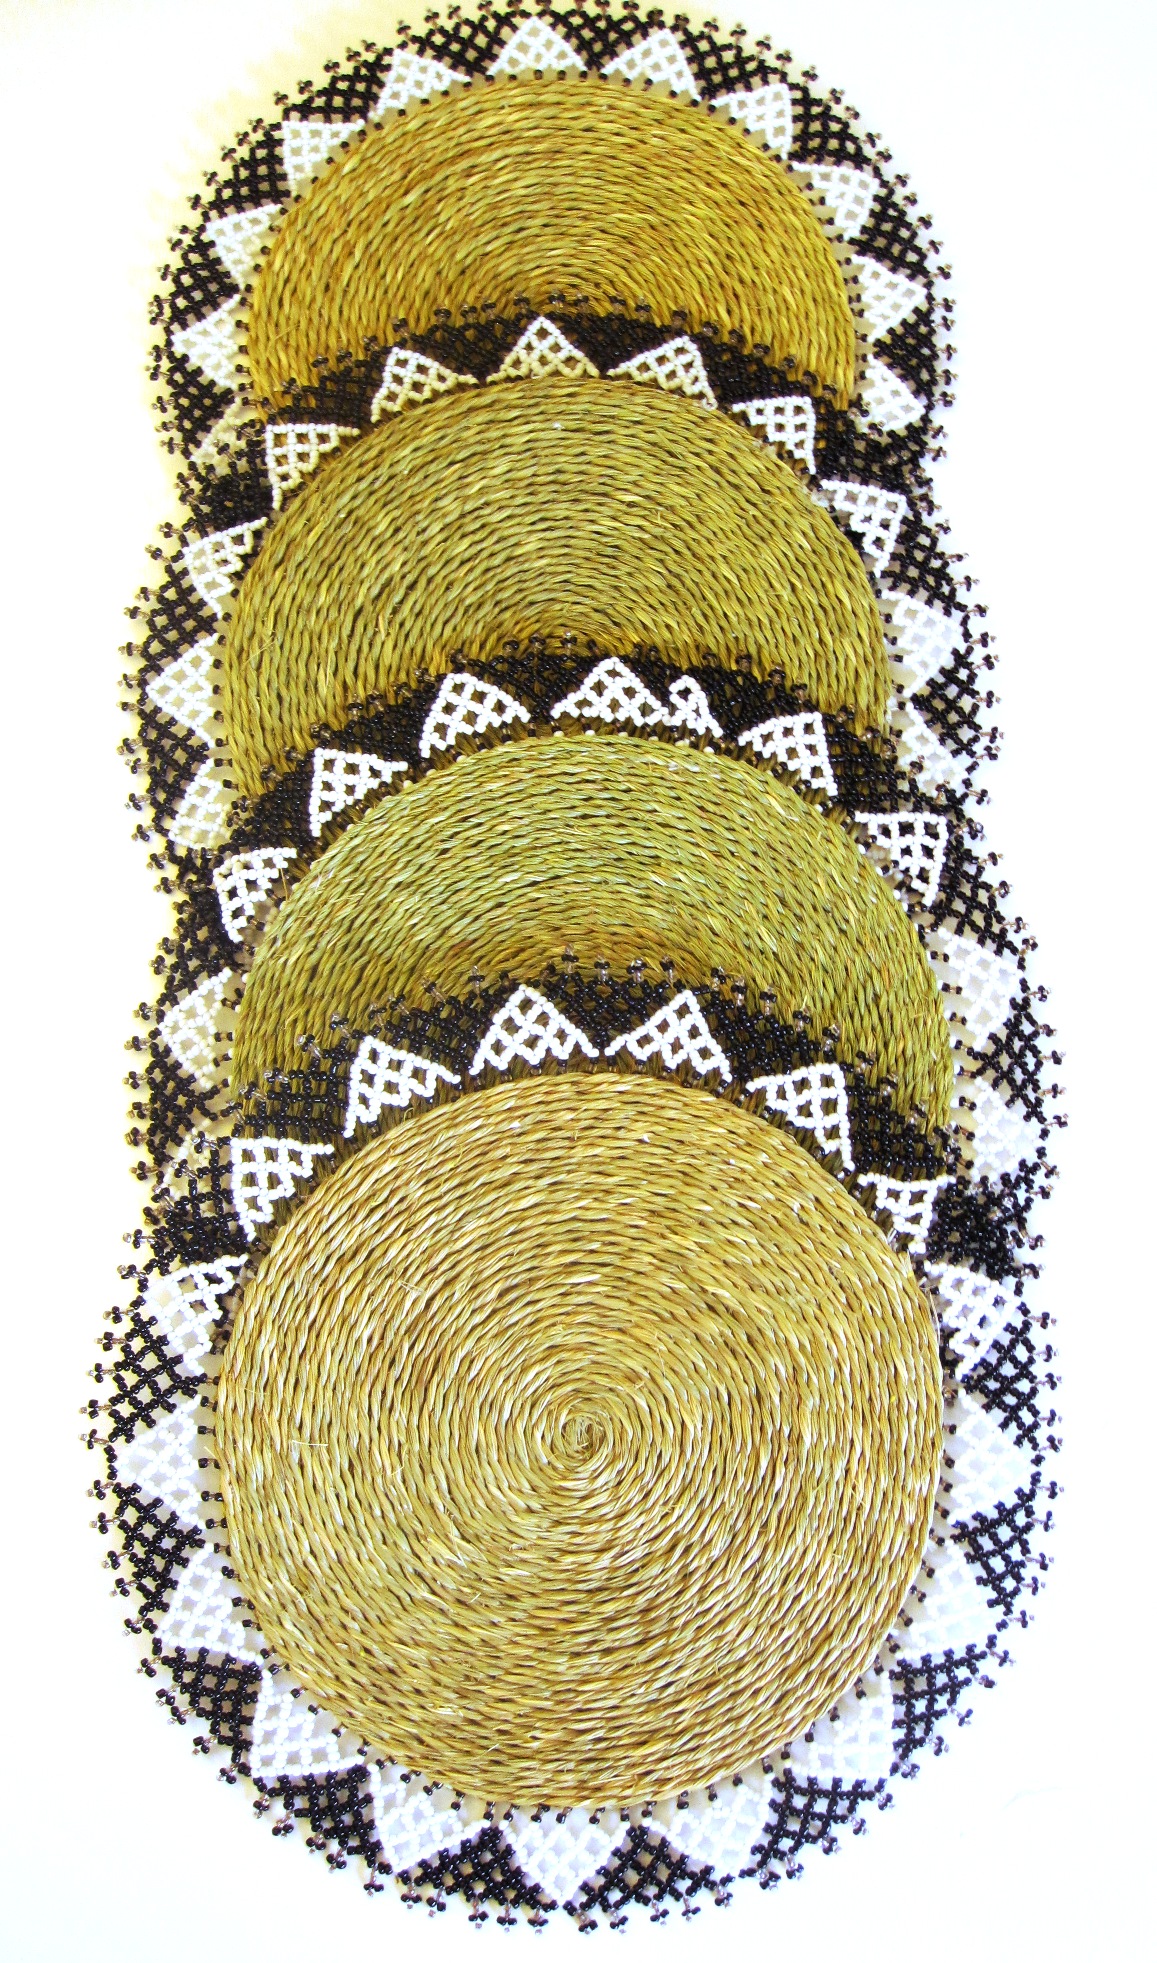 Ndebele Grass & Bead Placemat - Black & White - Large